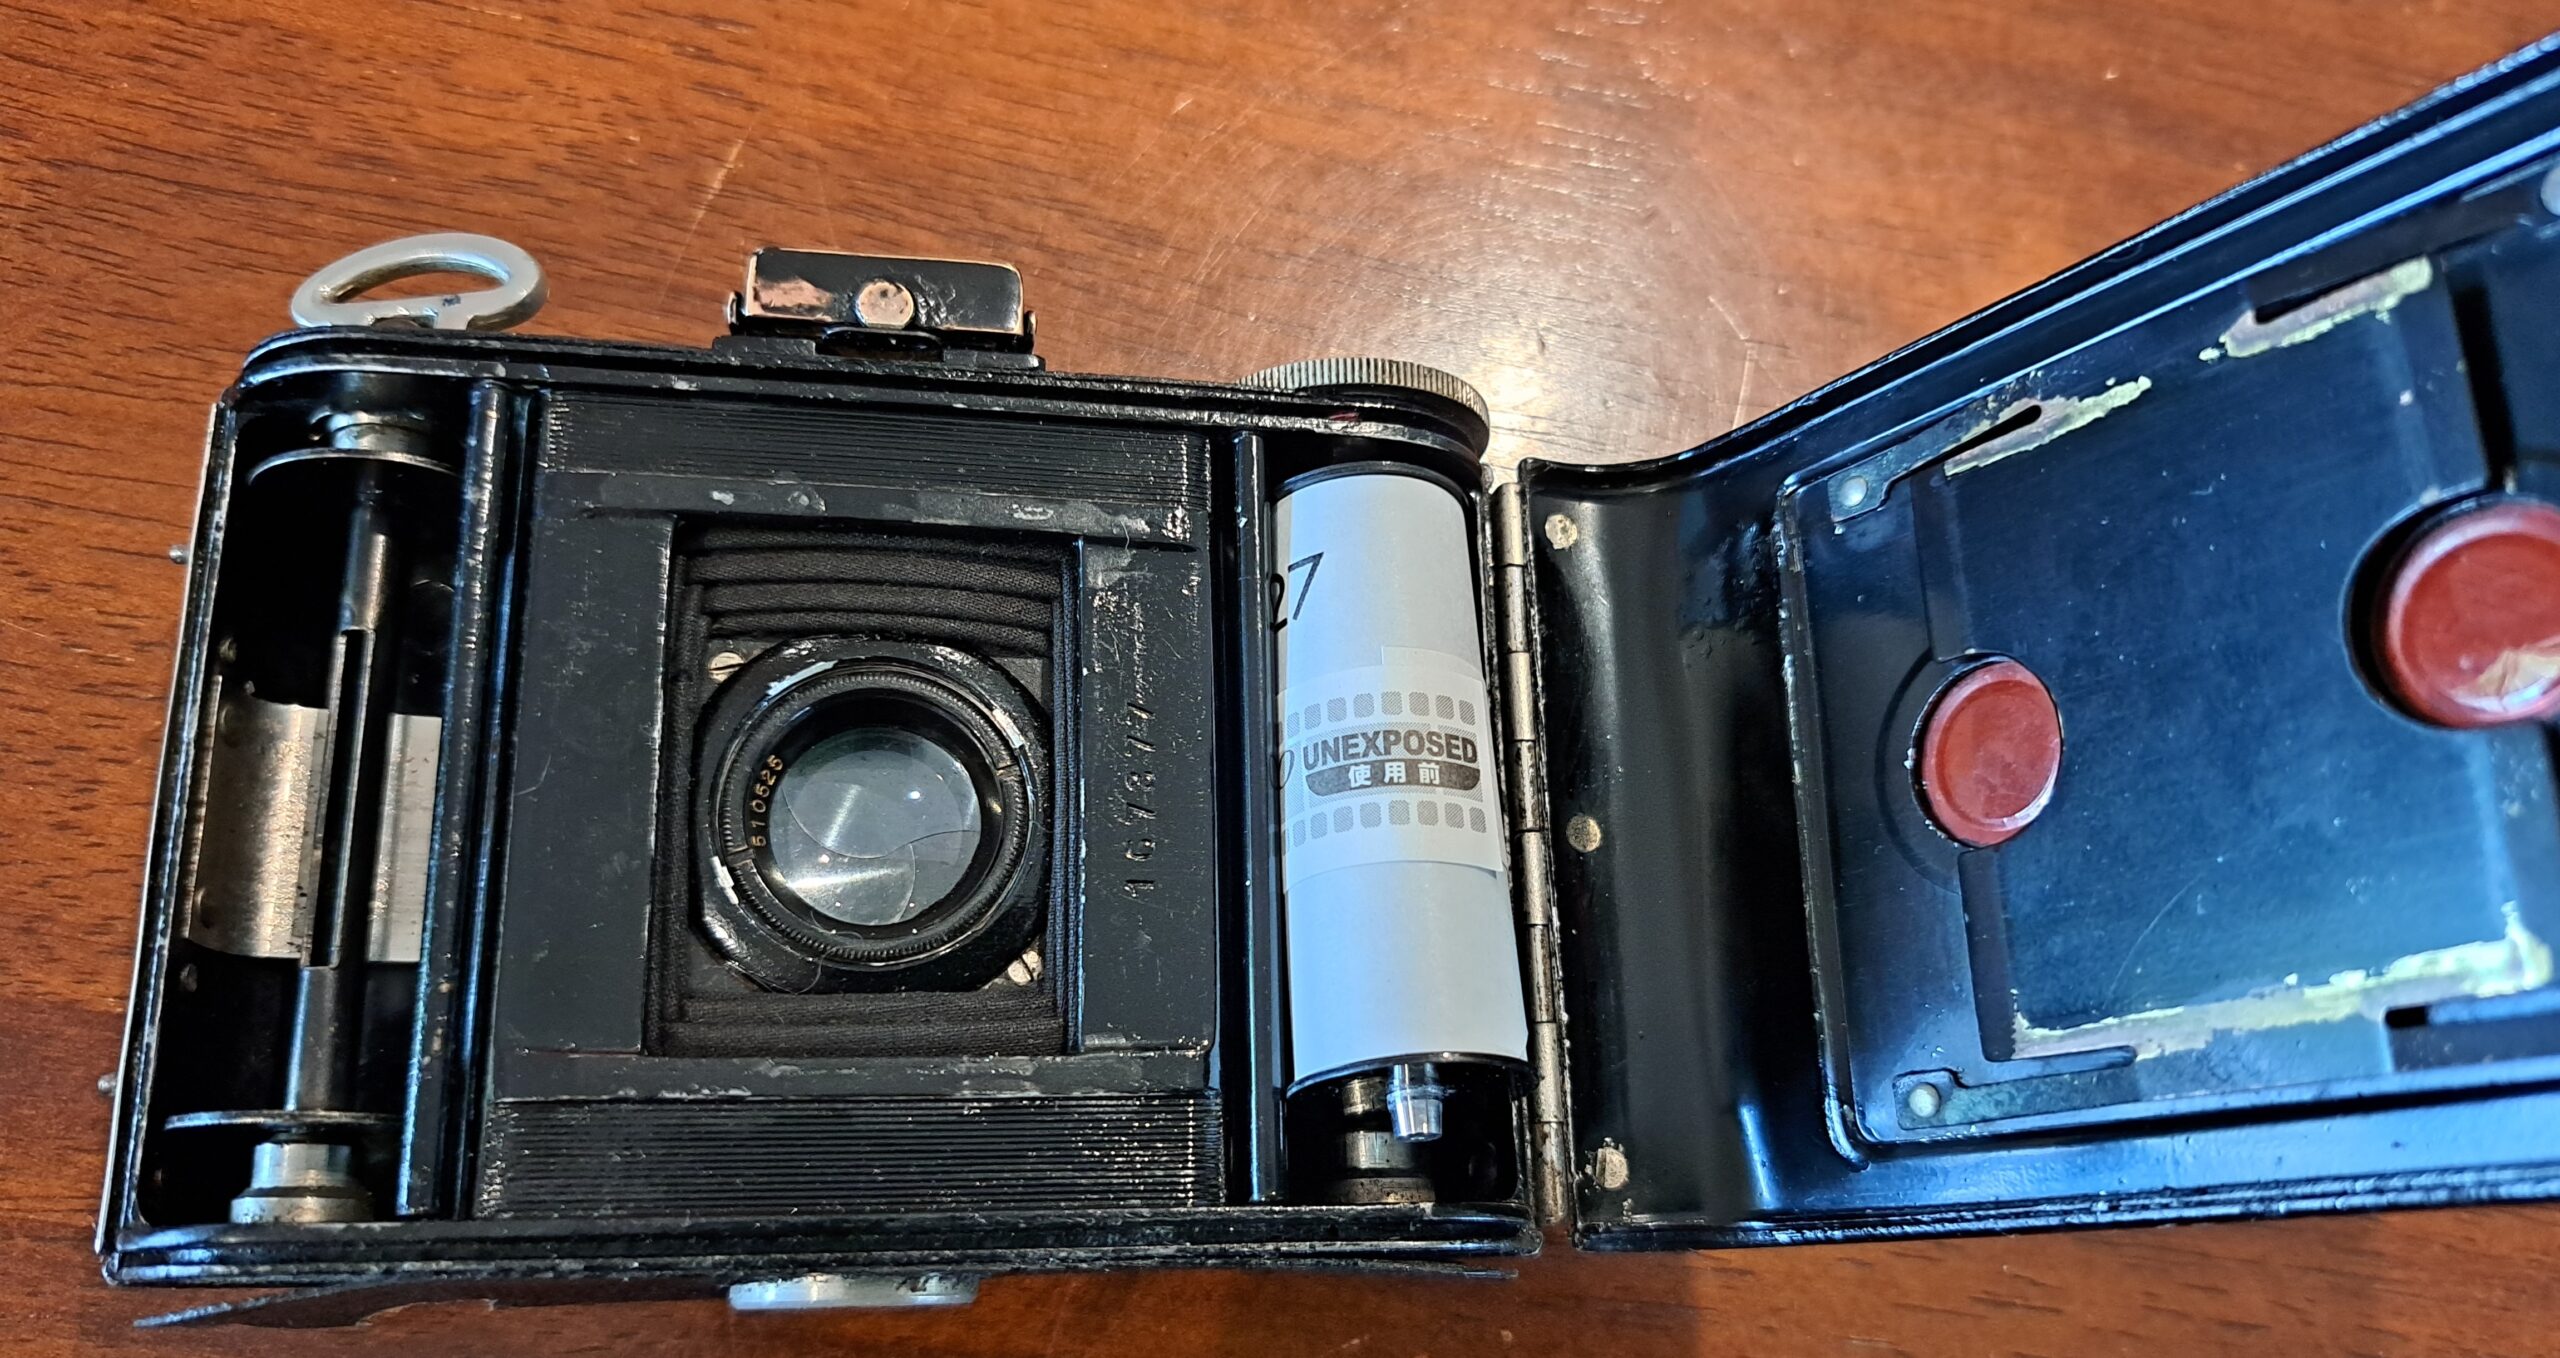 Vintage camera with the back open and a roll of 127 film in the right hand side ready to load.